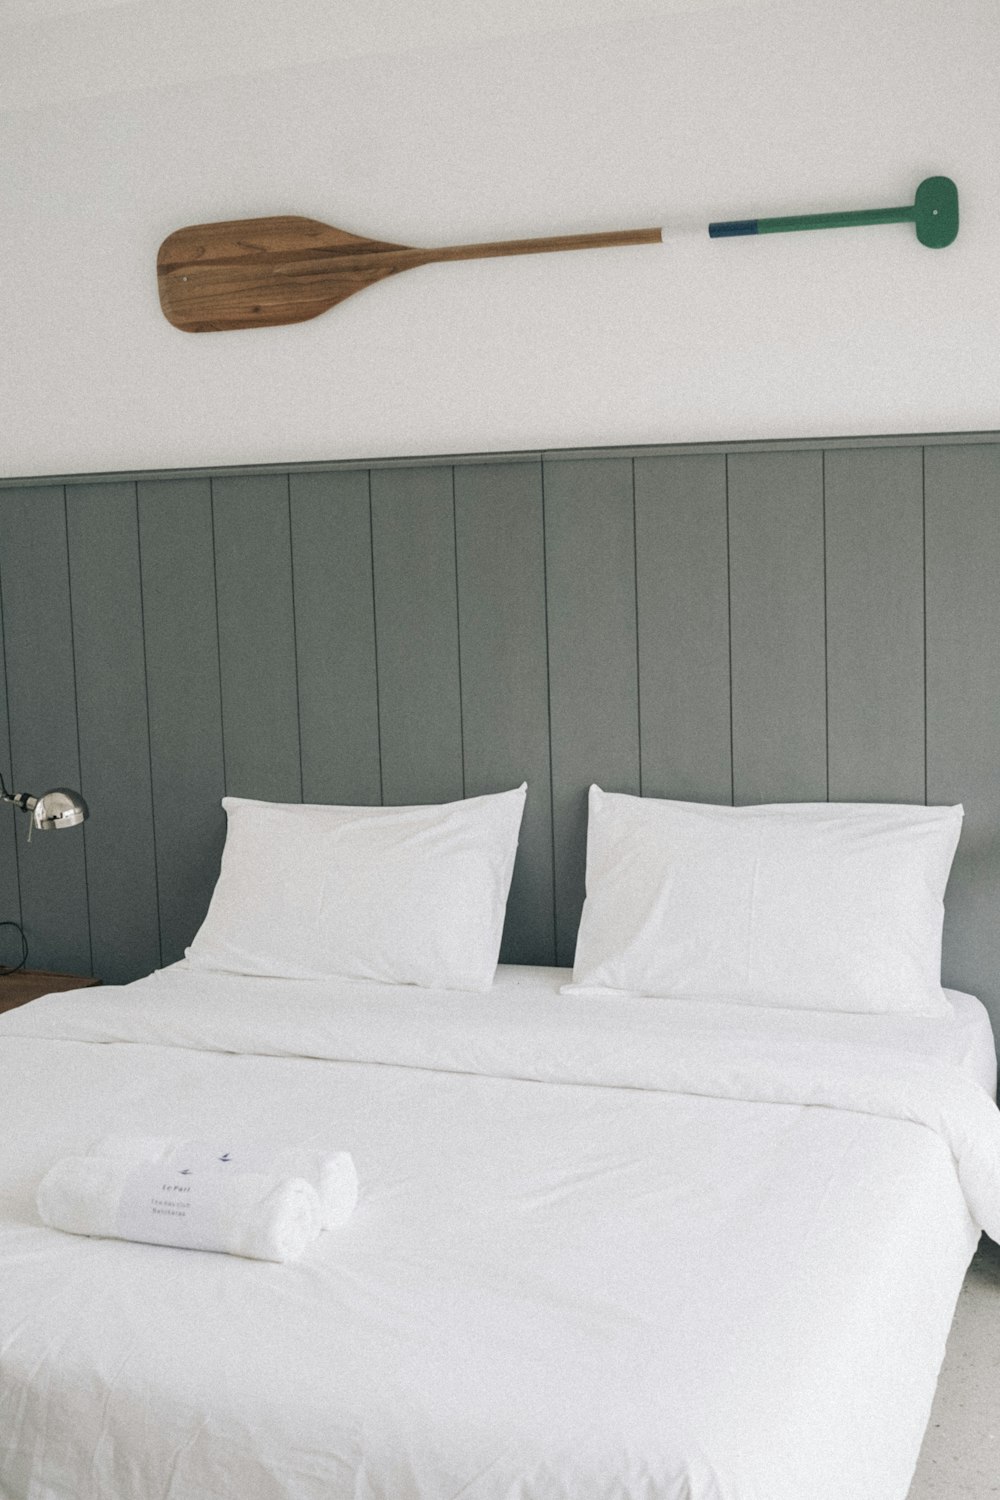 a bed with white sheets and a wooden paddle on the wall